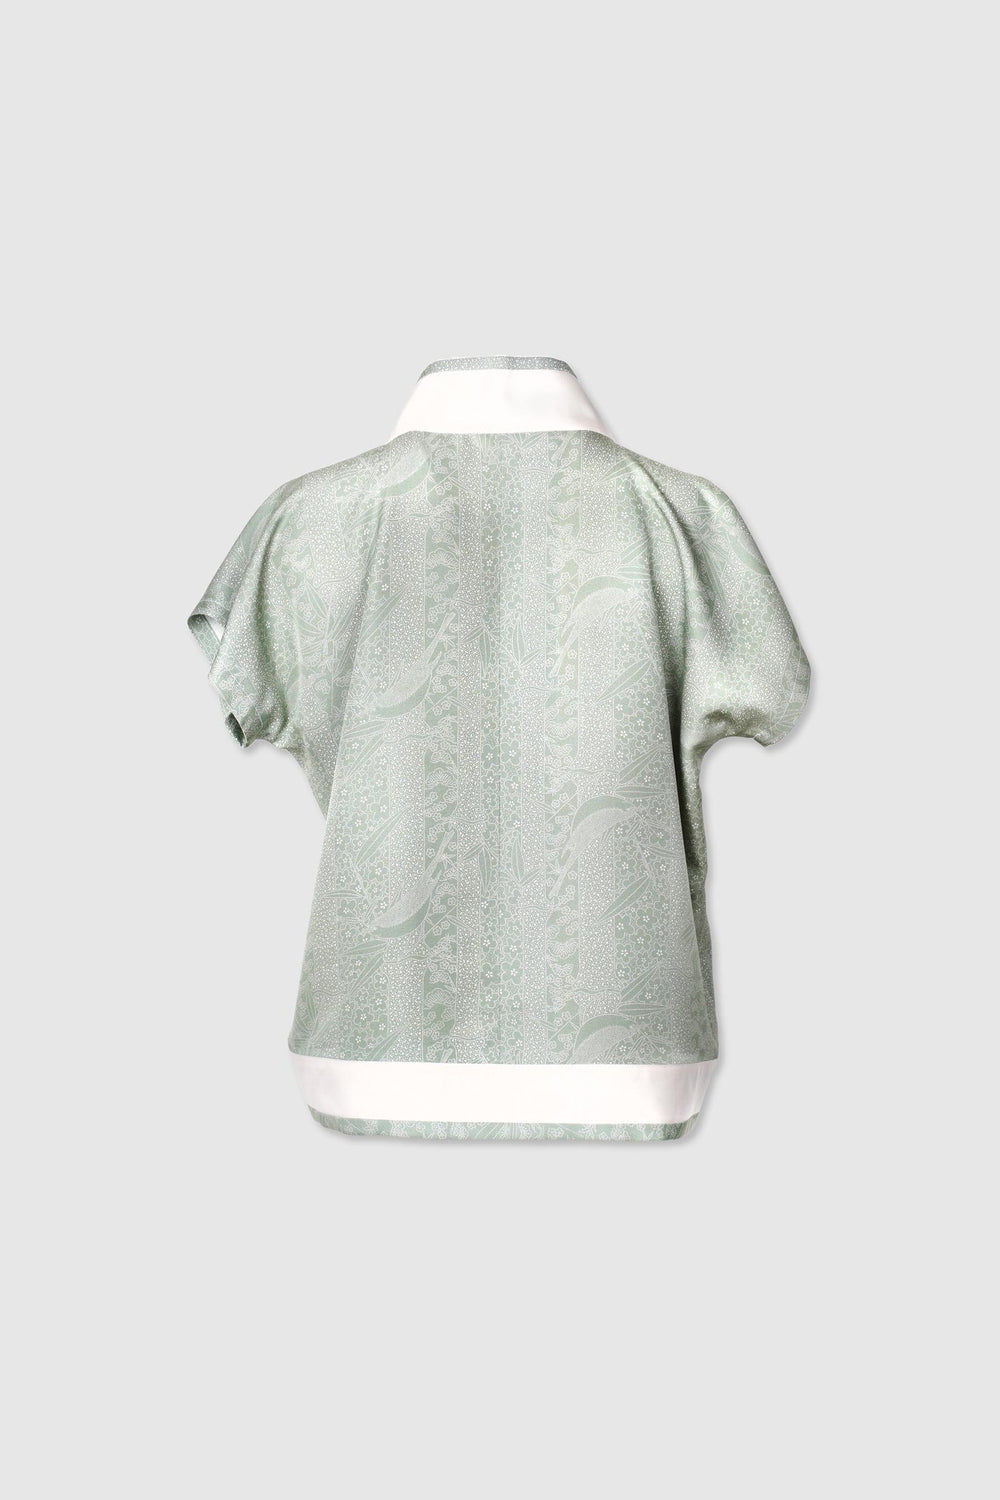 V-Neck Light Sage Green Patterned Silk Blouse with Off-White Lapel and Trimming